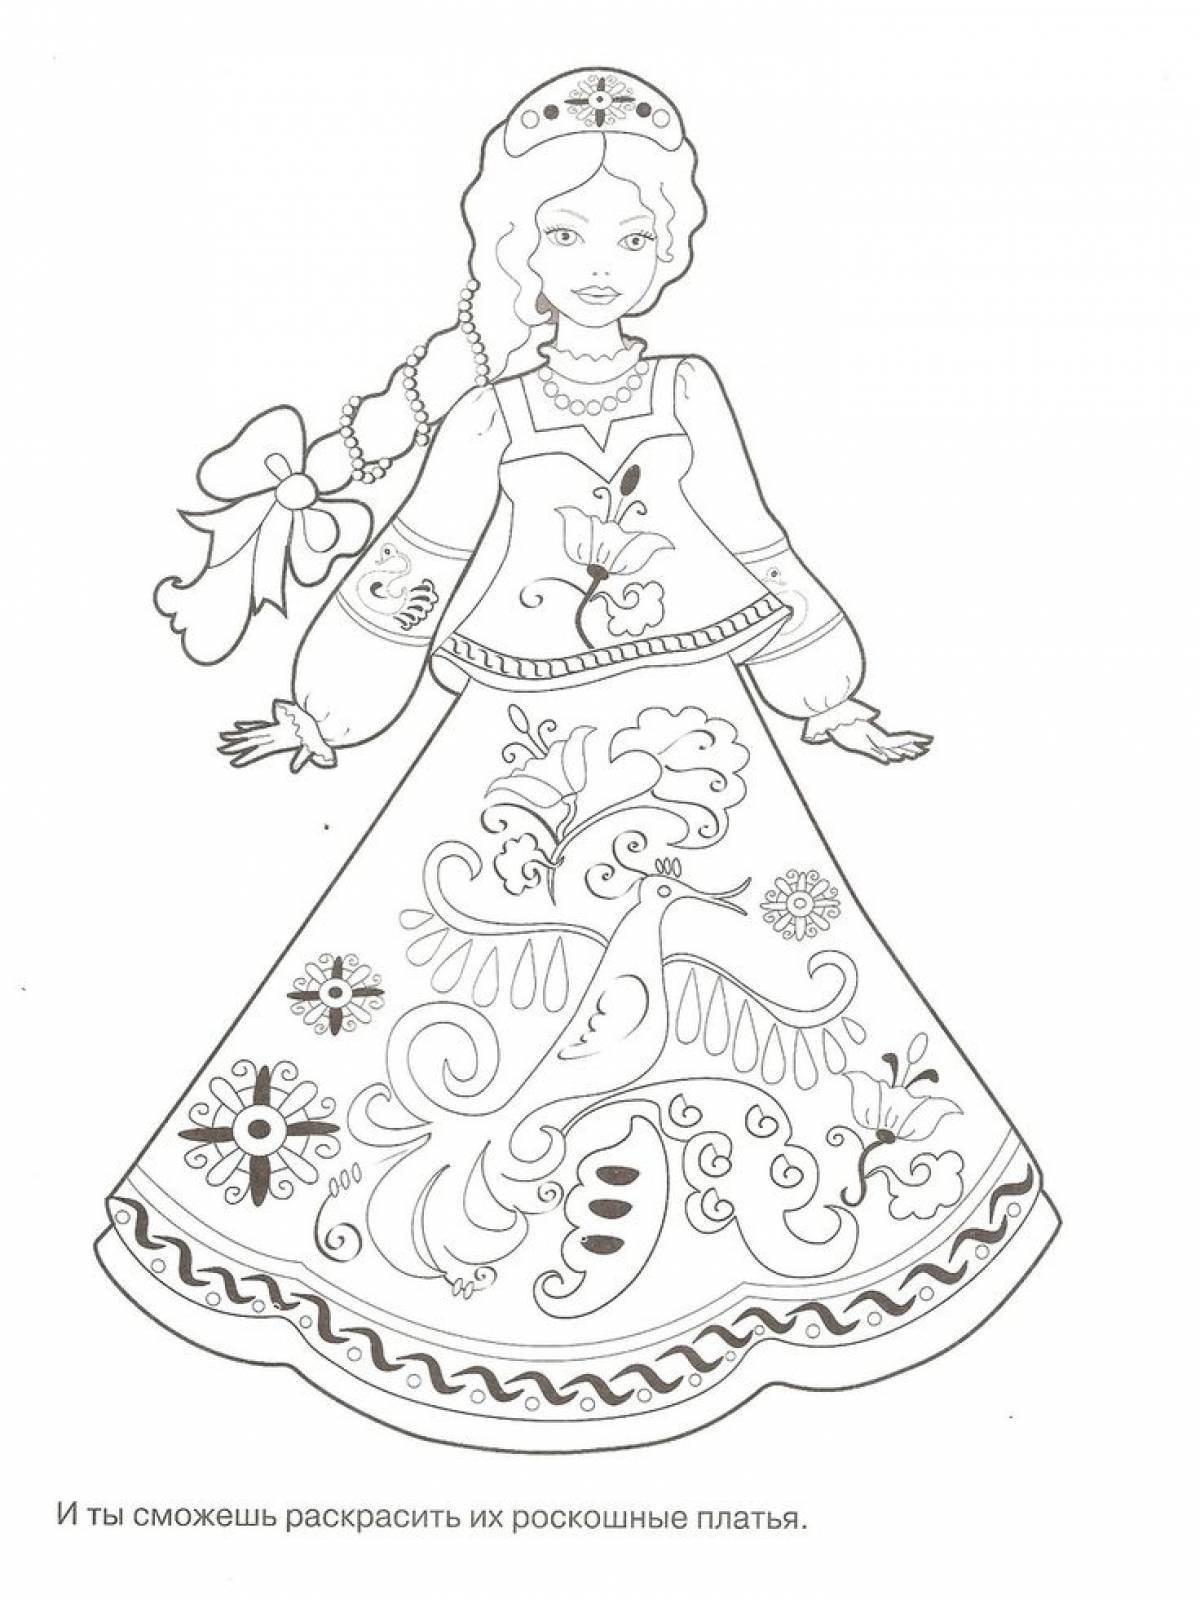 Russian folk costume coloring page